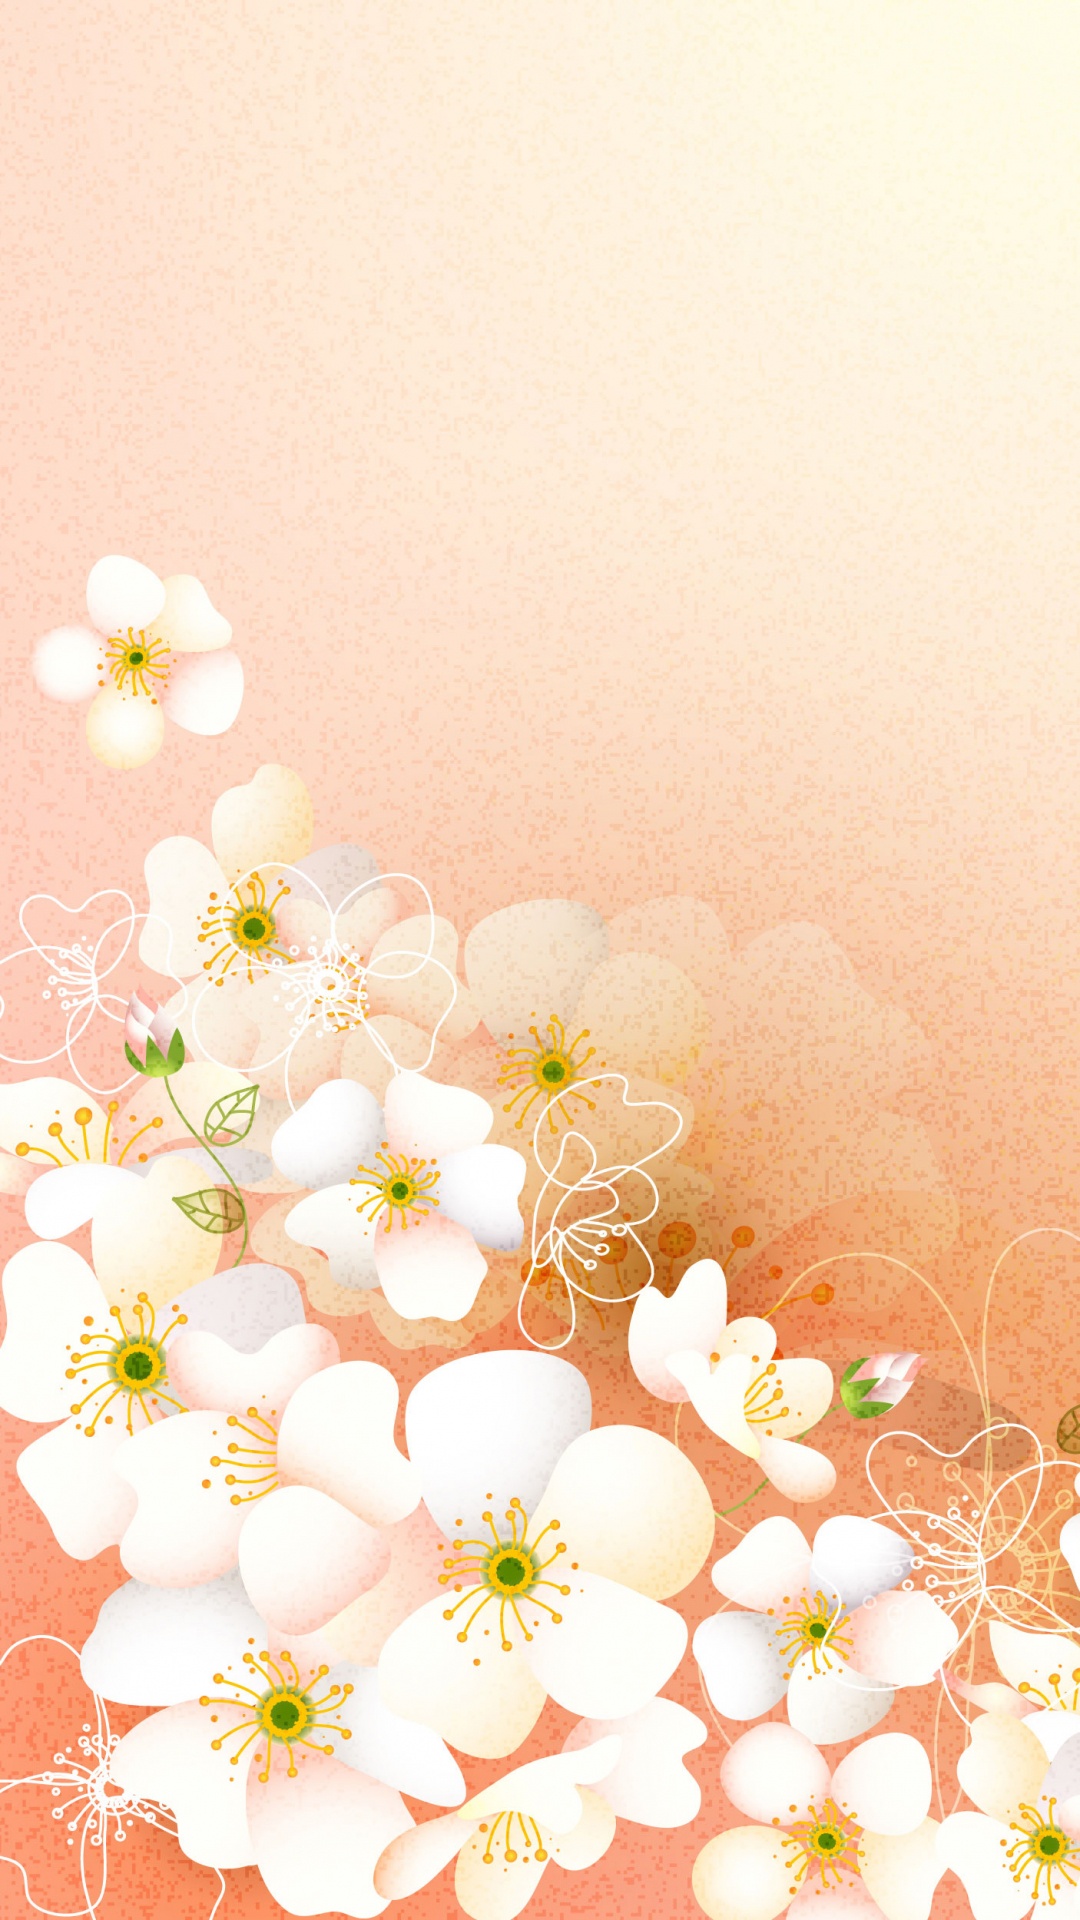 White and Yellow Flowers With Pink Background. Wallpaper in 1080x1920 Resolution